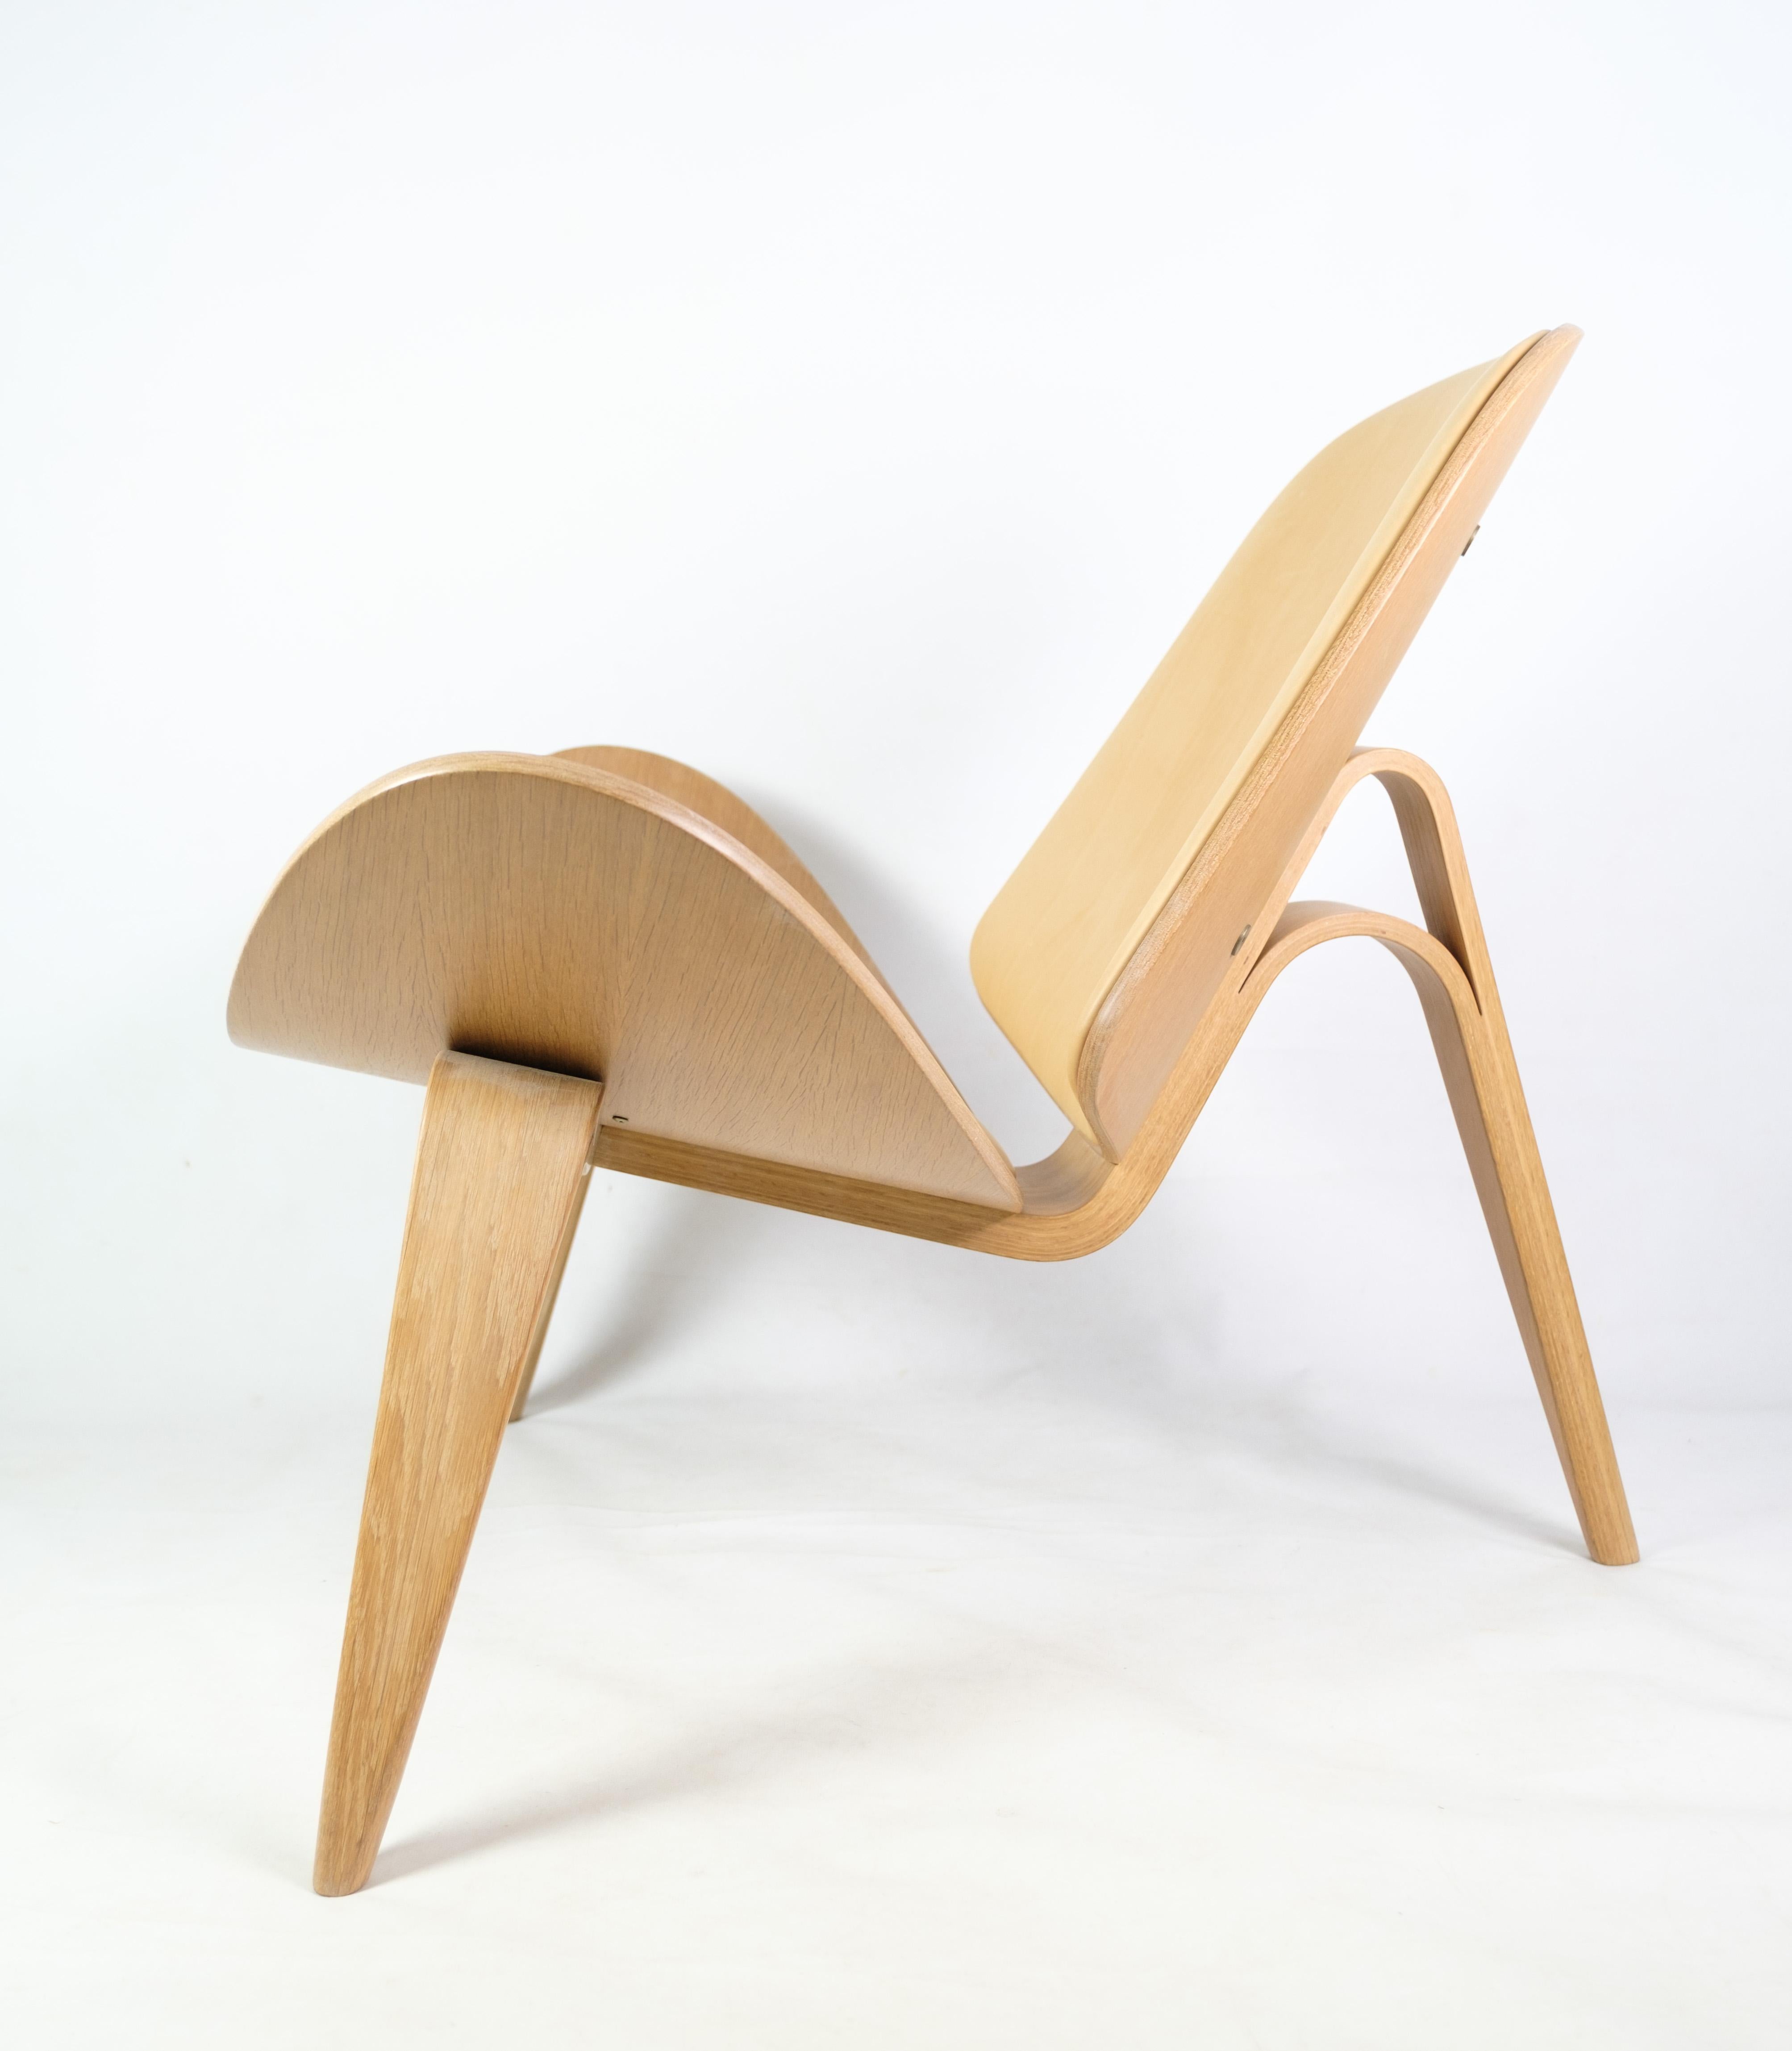 The shell chair model CH07, designed by Hans J. Wegner, made of oak with light natural leather with patina by Carl Hansen & Søn with original labels.
H: 74 W: 91 D: 50 SH: 36